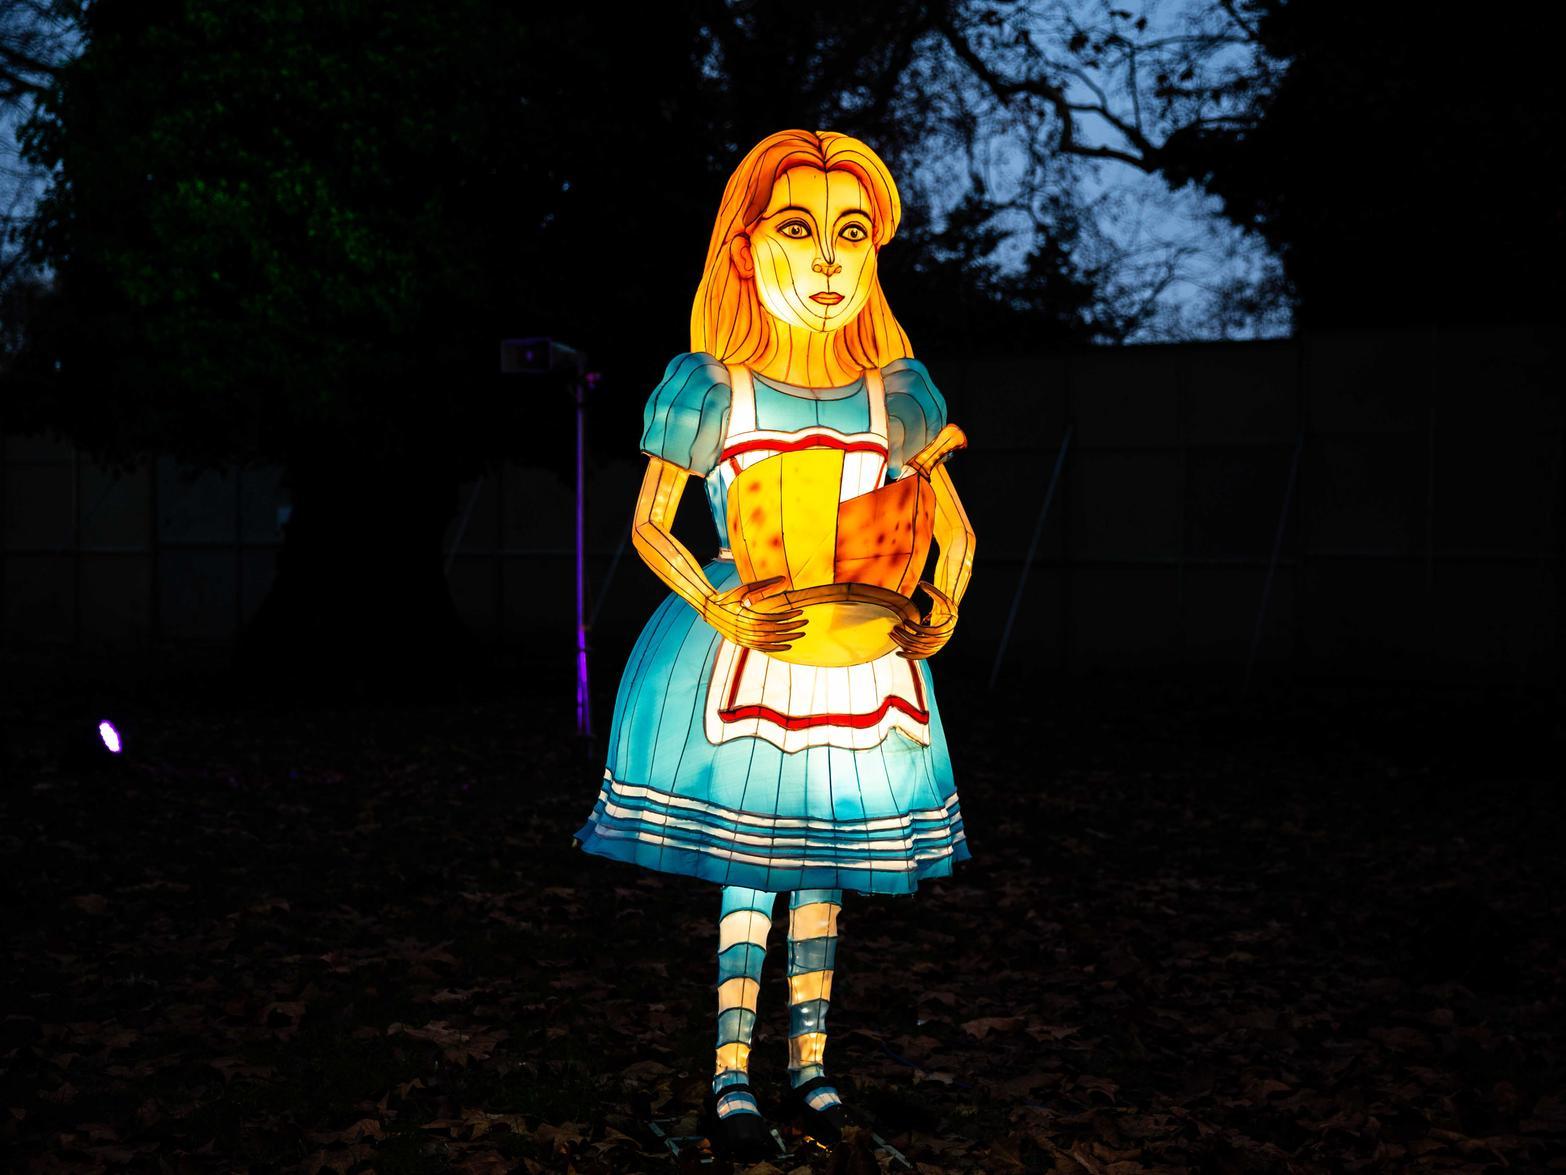 Lightwater Valley is set for a magical experience as huge Alice in Wonderland figures illuminate the park this Christmas. The trail is open Friday, Saturday and Sunday from November 22  December 15 and then on Friday, Saturday, Sunday and Monday from  December 20-30. Doors open at 4pm with last entry at 7pm.